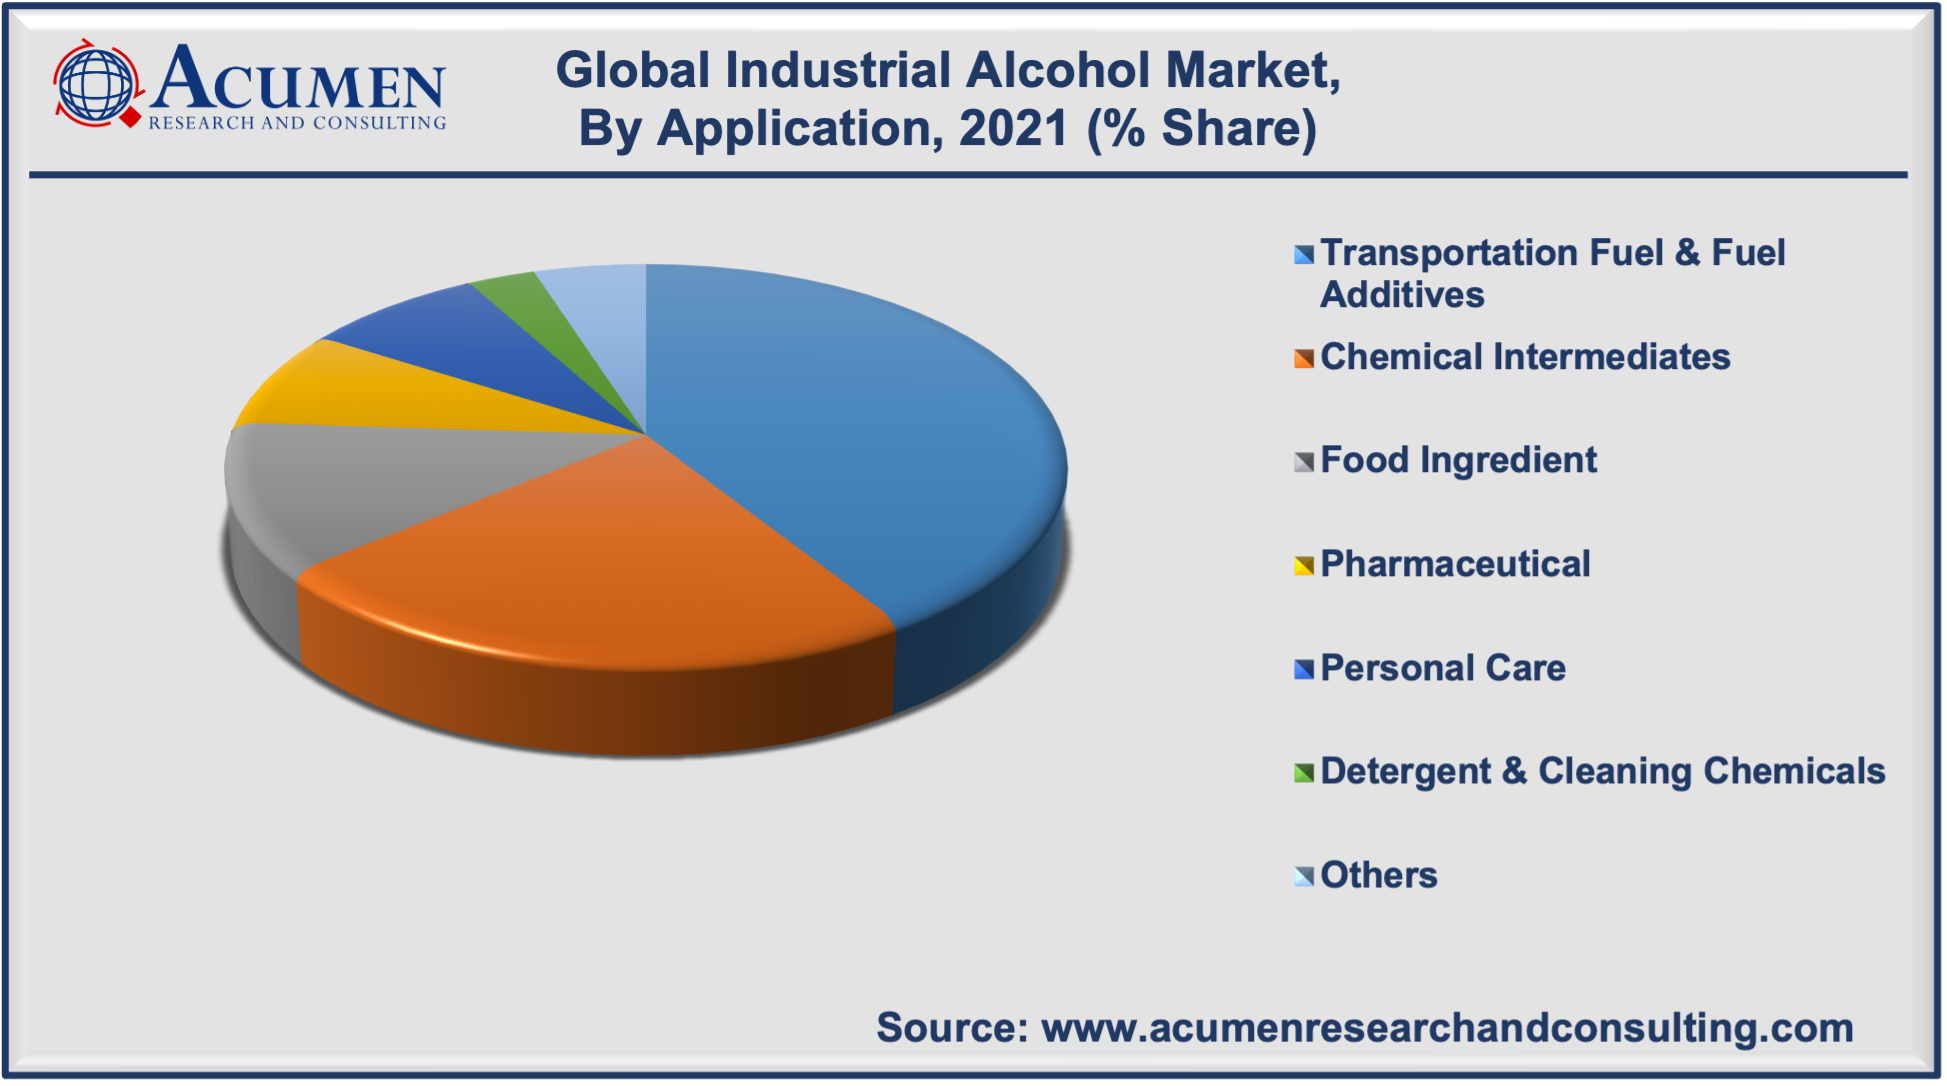 Industrial Alcohol Market Analysis accounted for USD 124 Billion in 2021 and is estimated to reach the market value of USD 301 Billion by 2030.